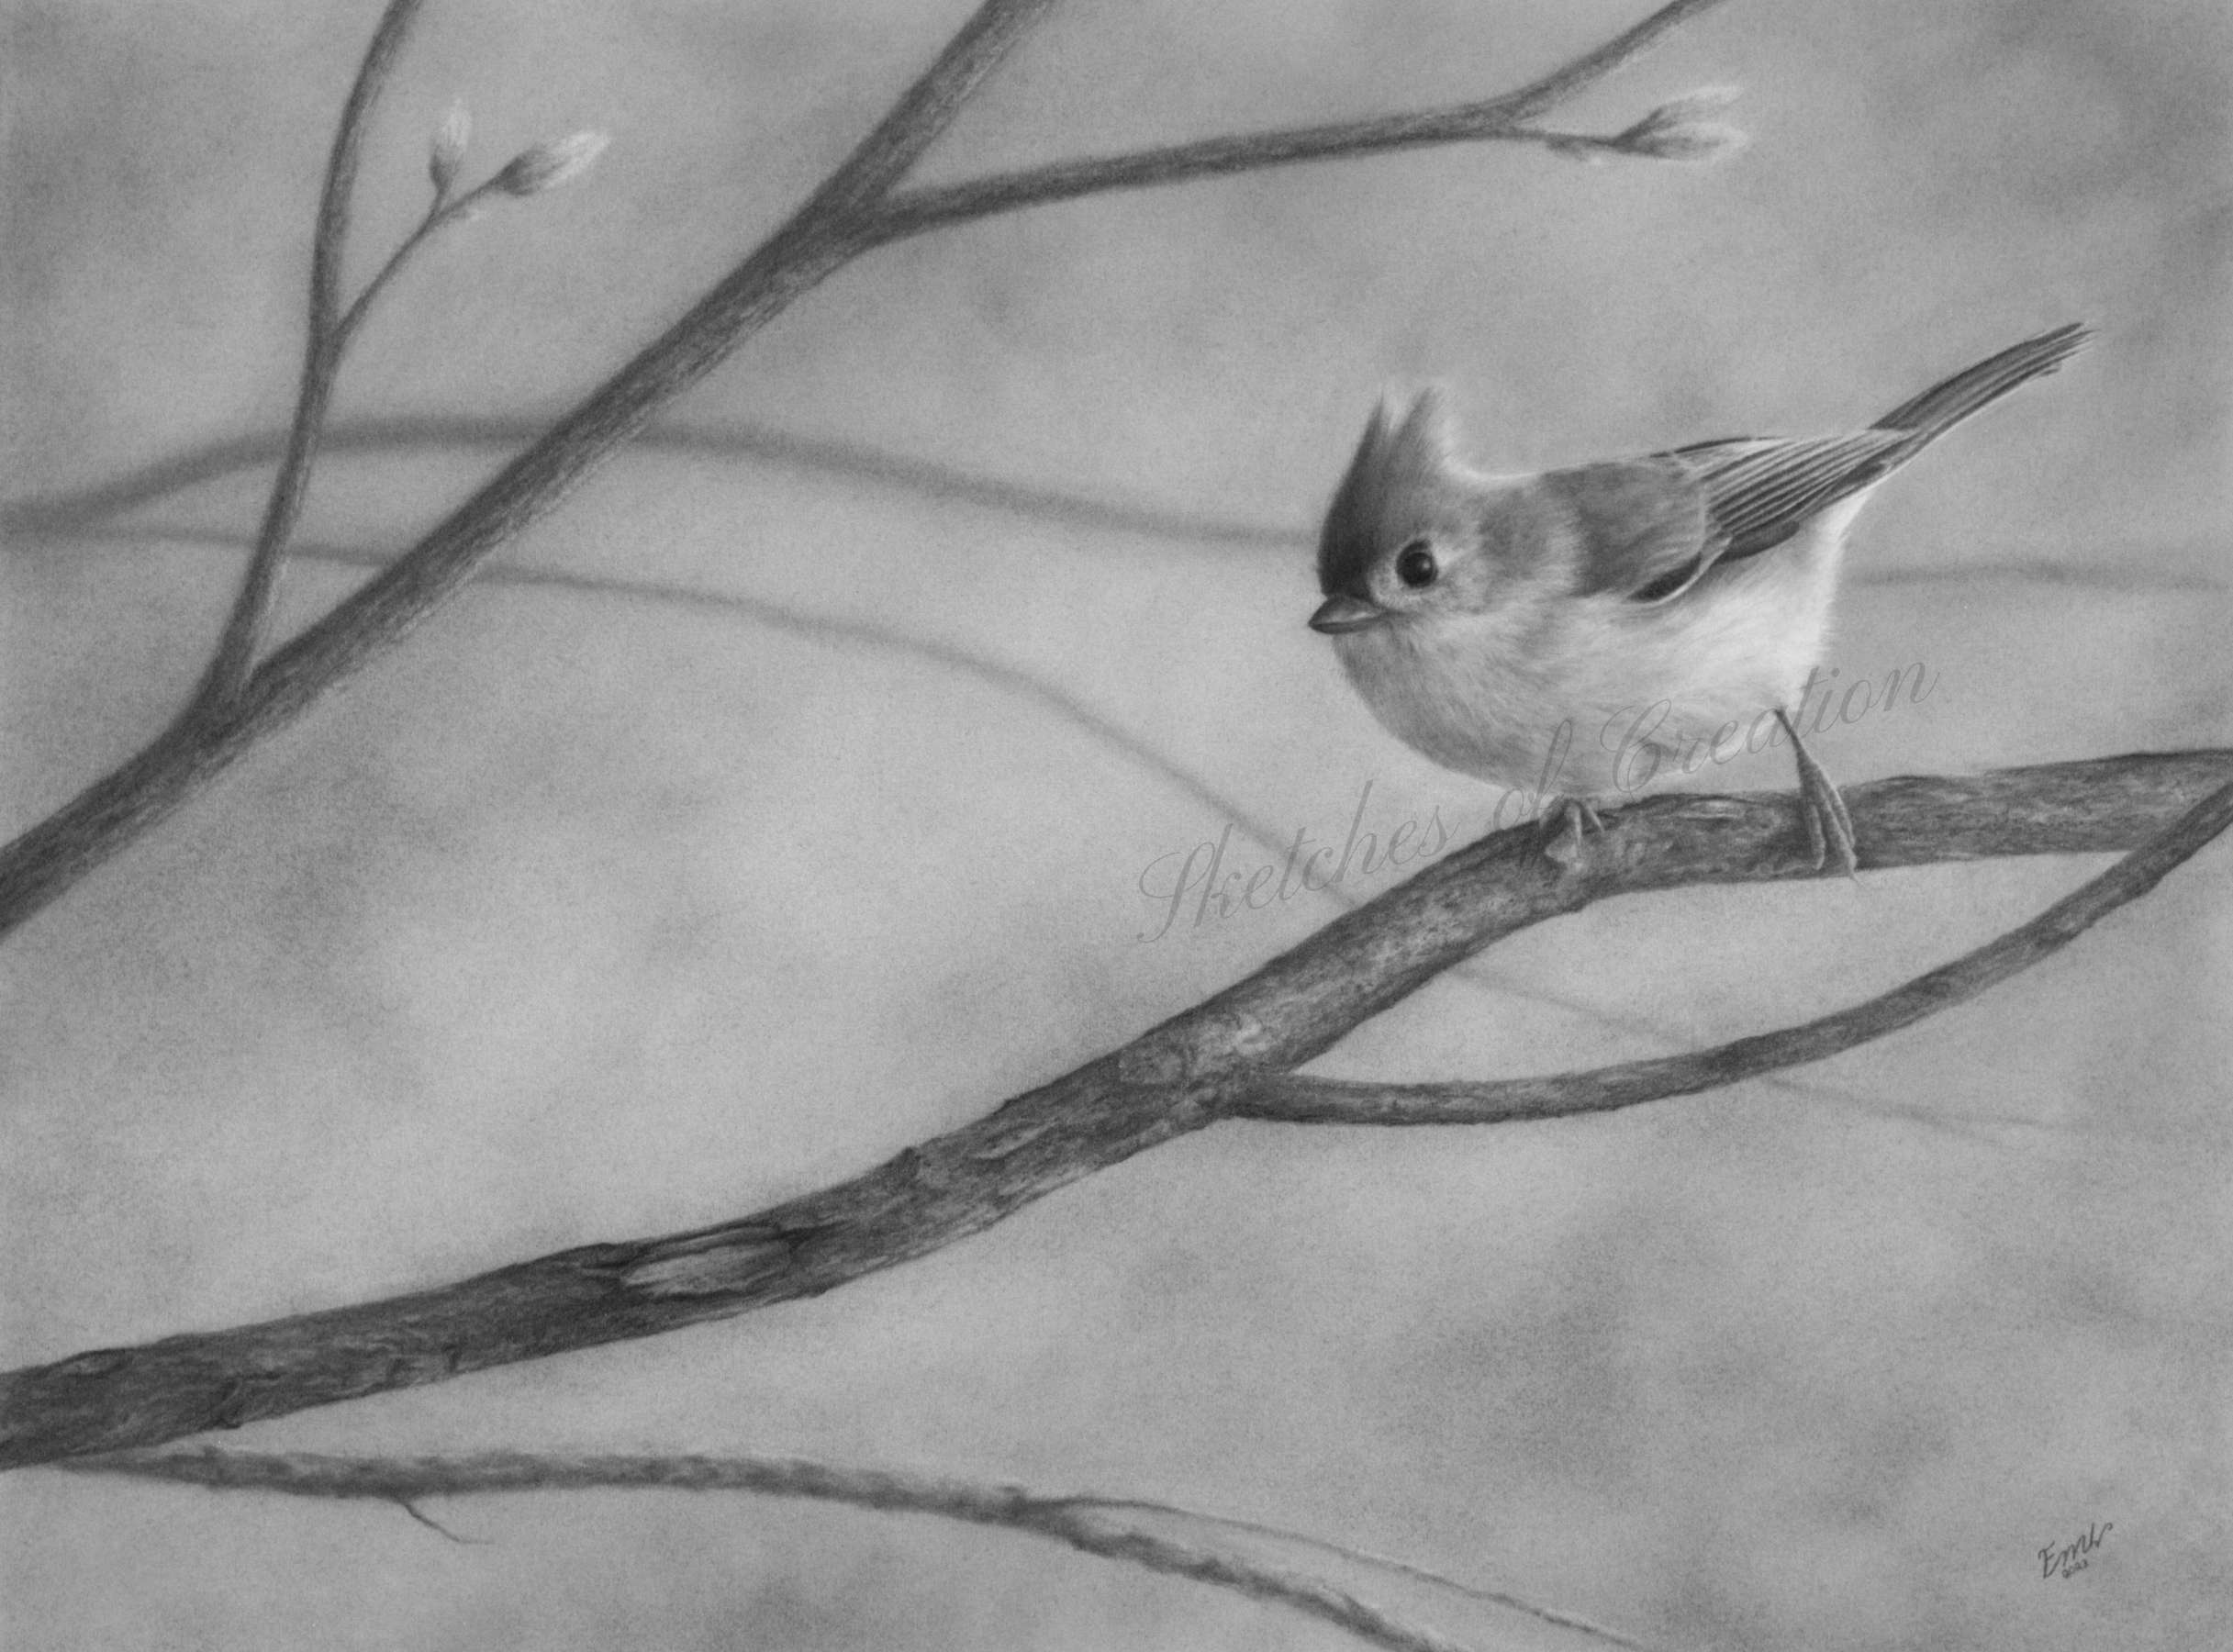 A drawing of a Tufted Titmouse about to hop on a branch